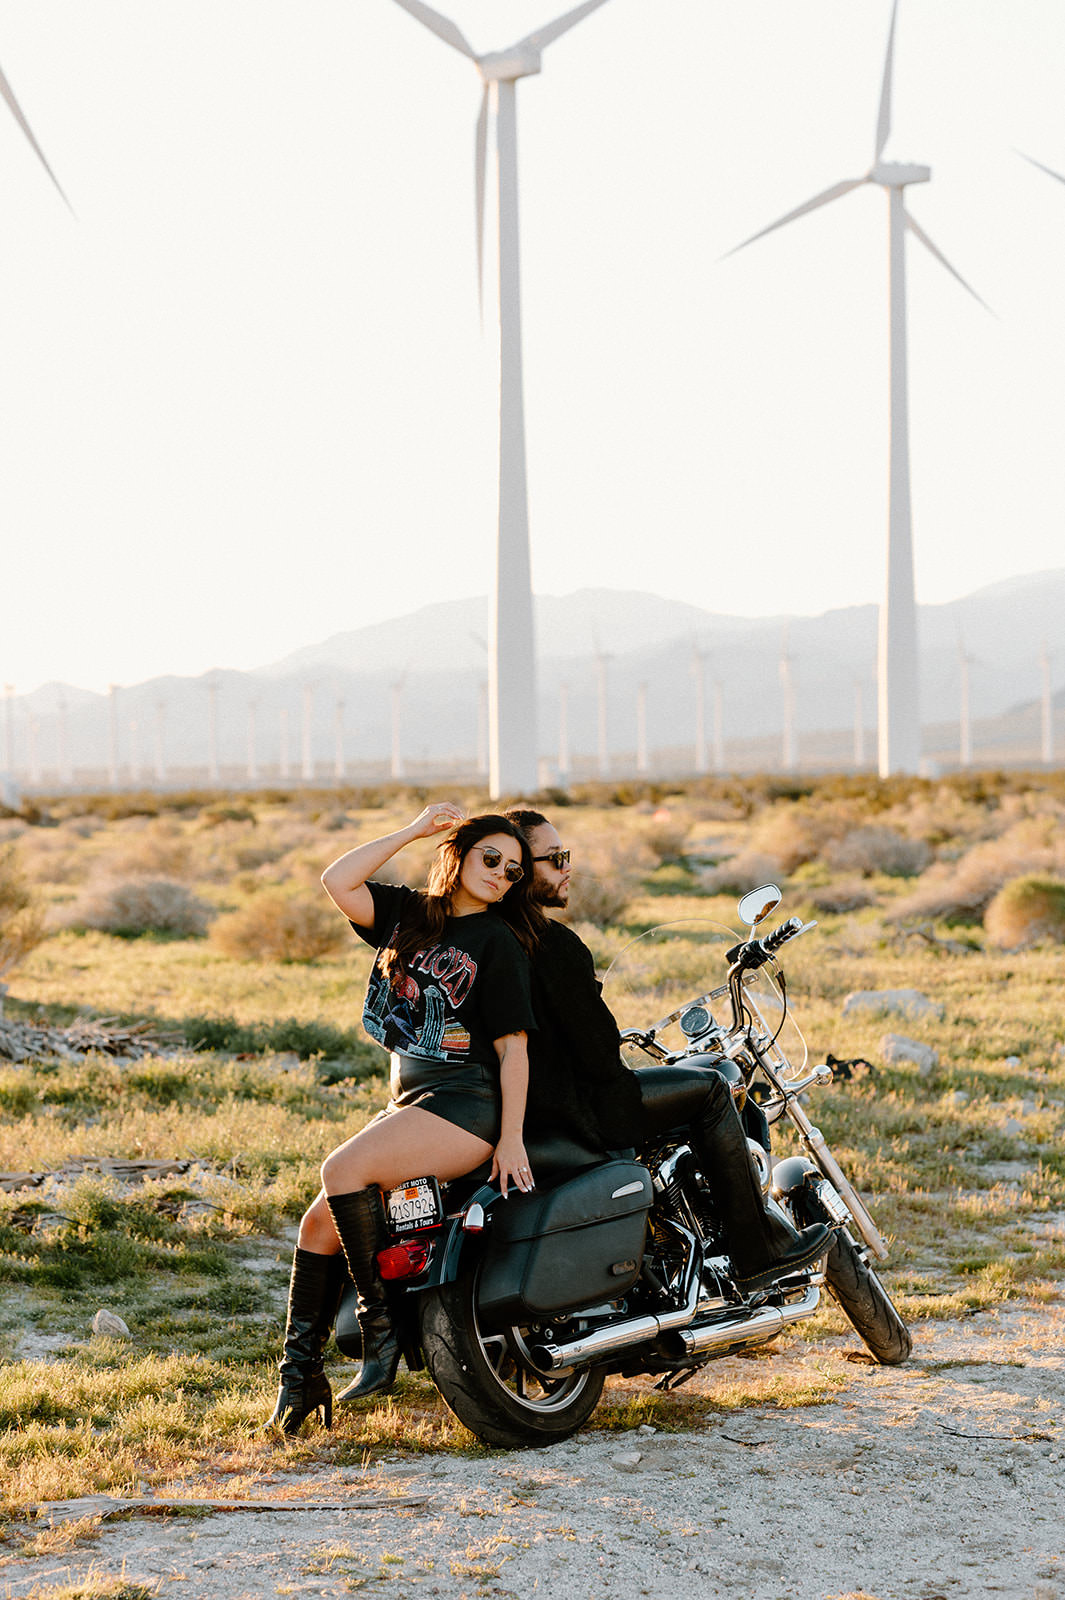 A couple poses on a motorcycle for during a Palm Springs couple getaway in California for their anniversary